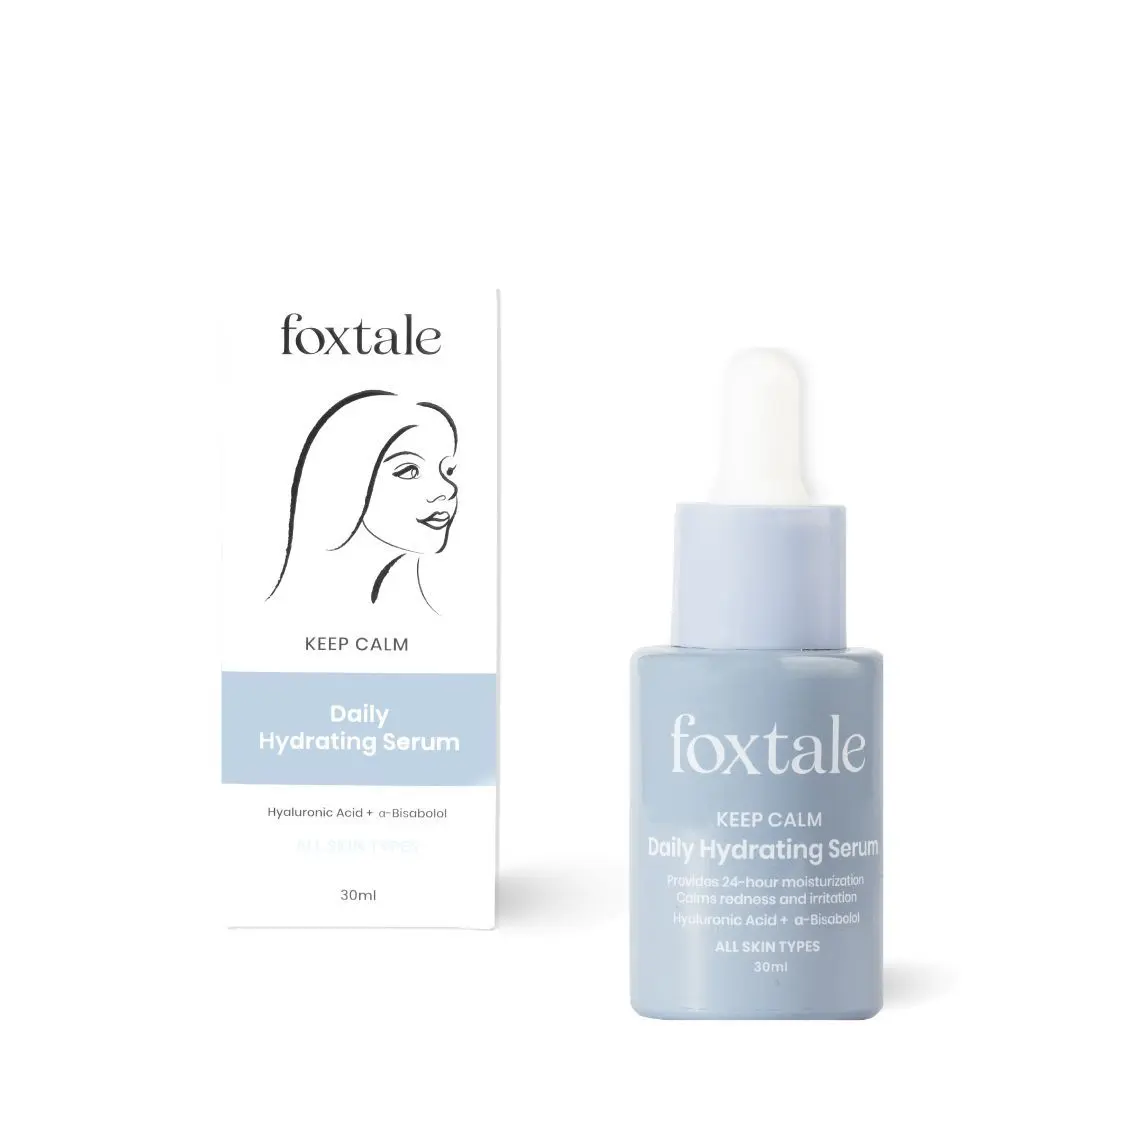 Foxtale - Keep Calm Daily Hydrating Serum with Hyaluronic Acid - 30ml